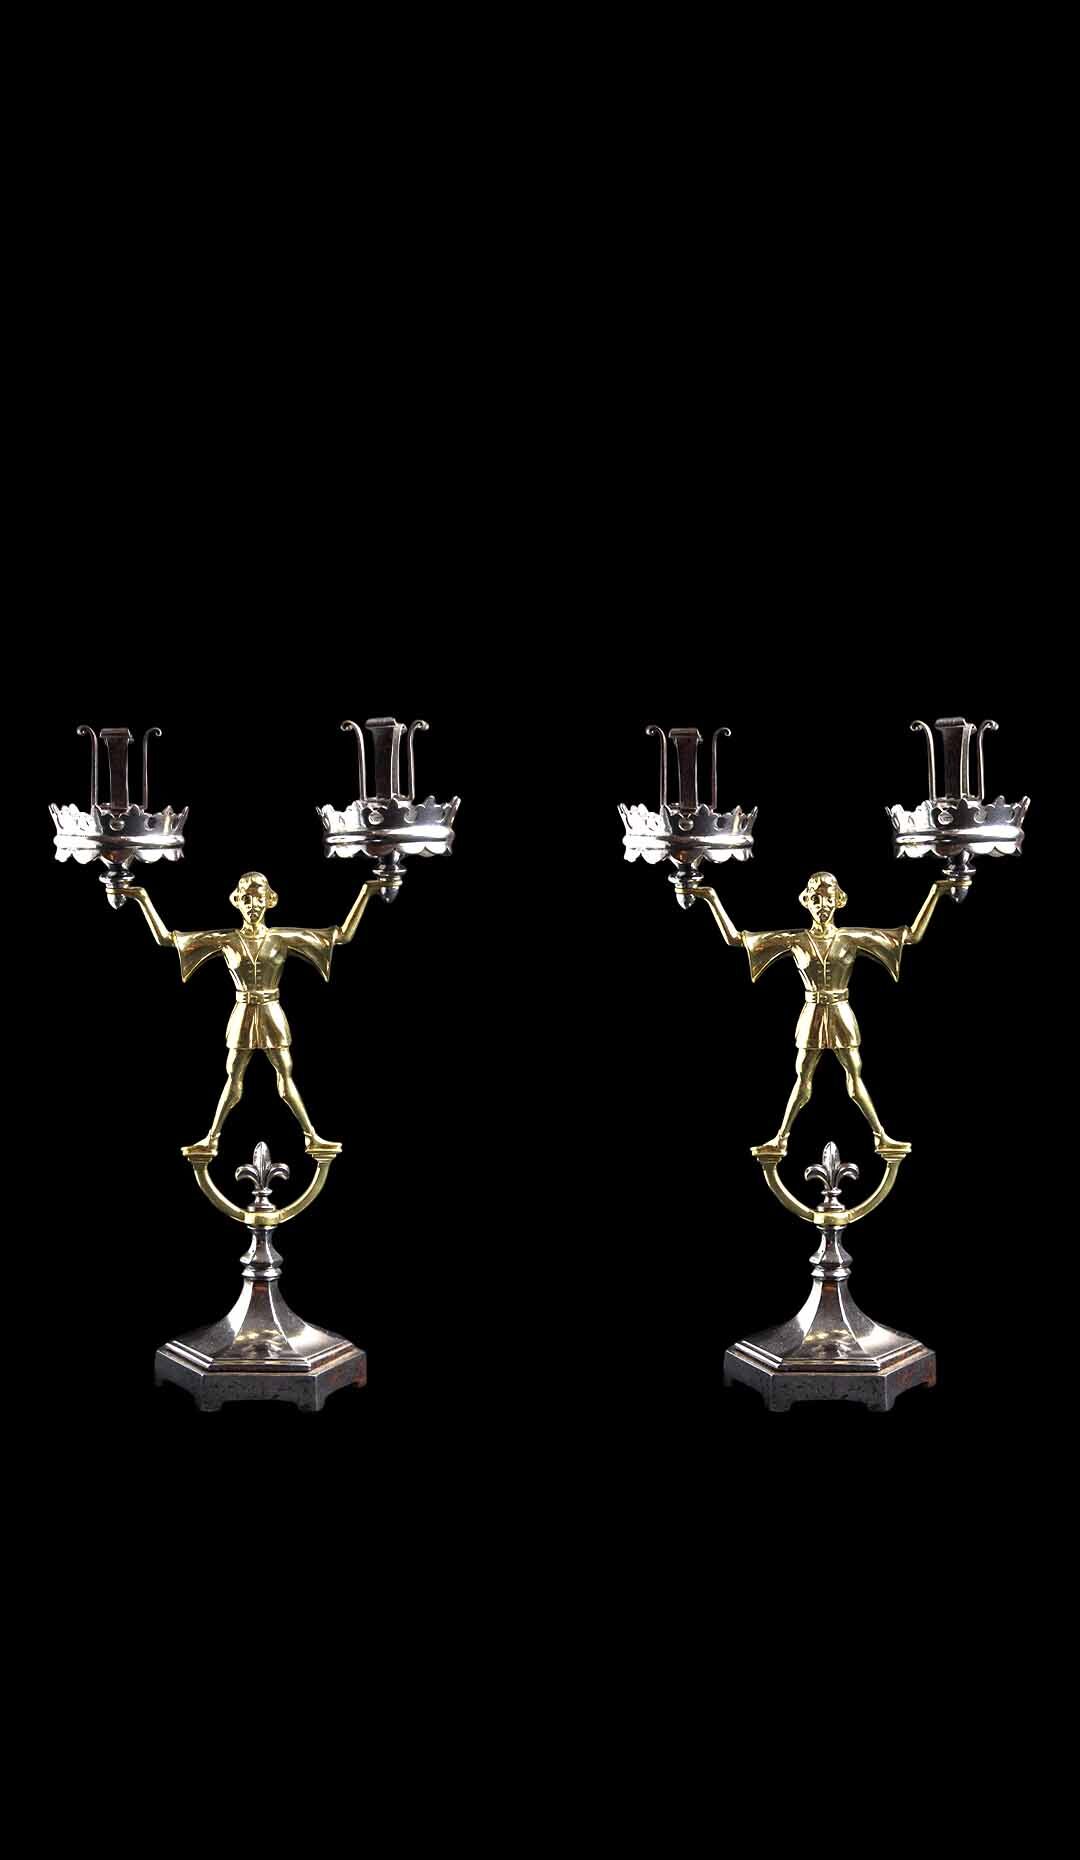 Gothic Style Metal Candlestick Pair